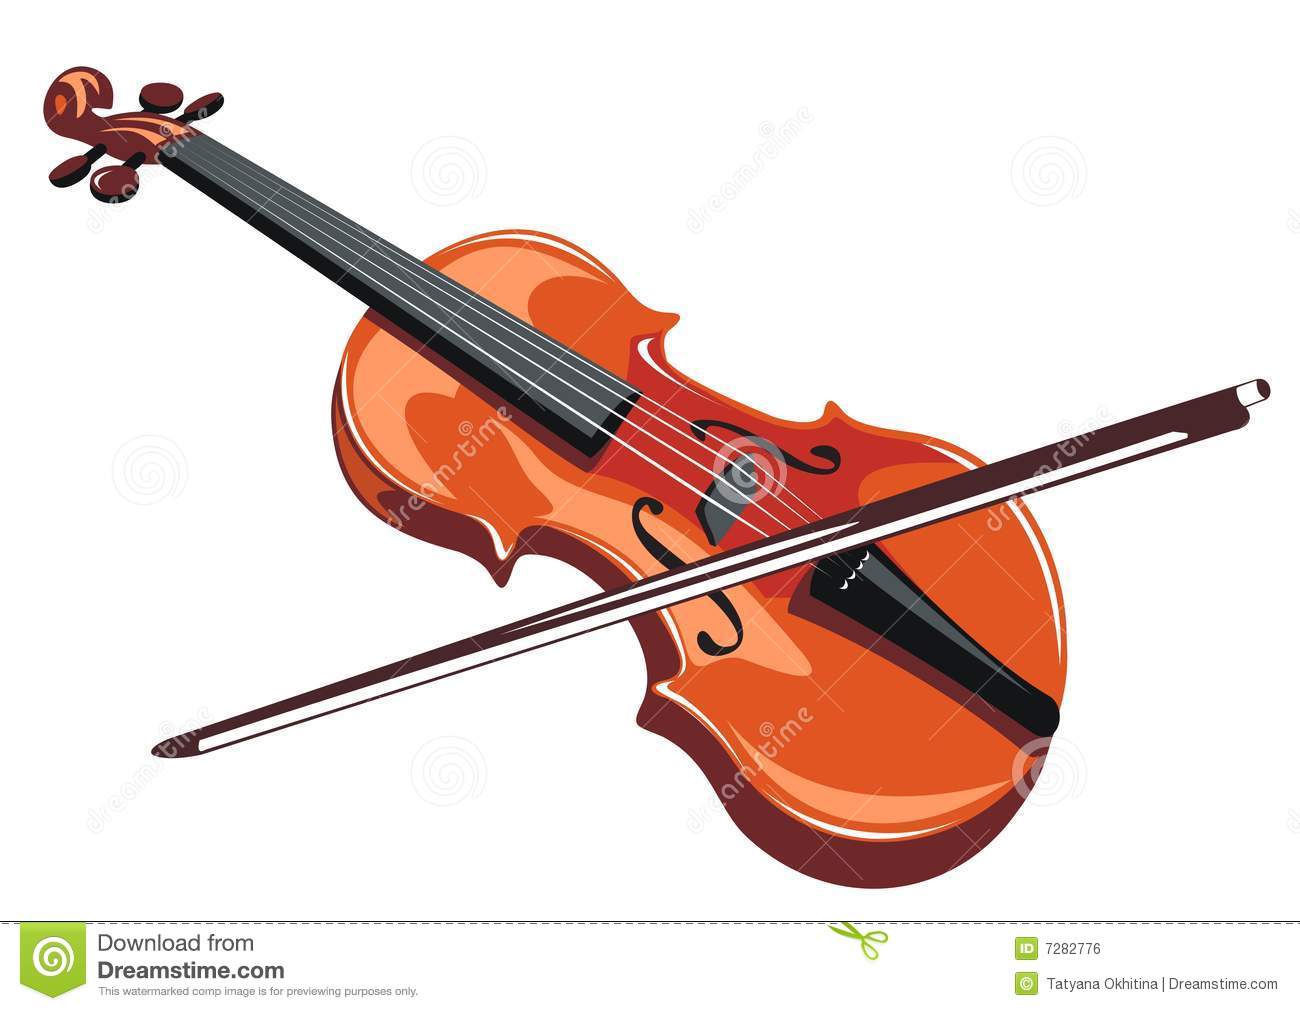 Stylized Violin And Bow Isolated On A White Background